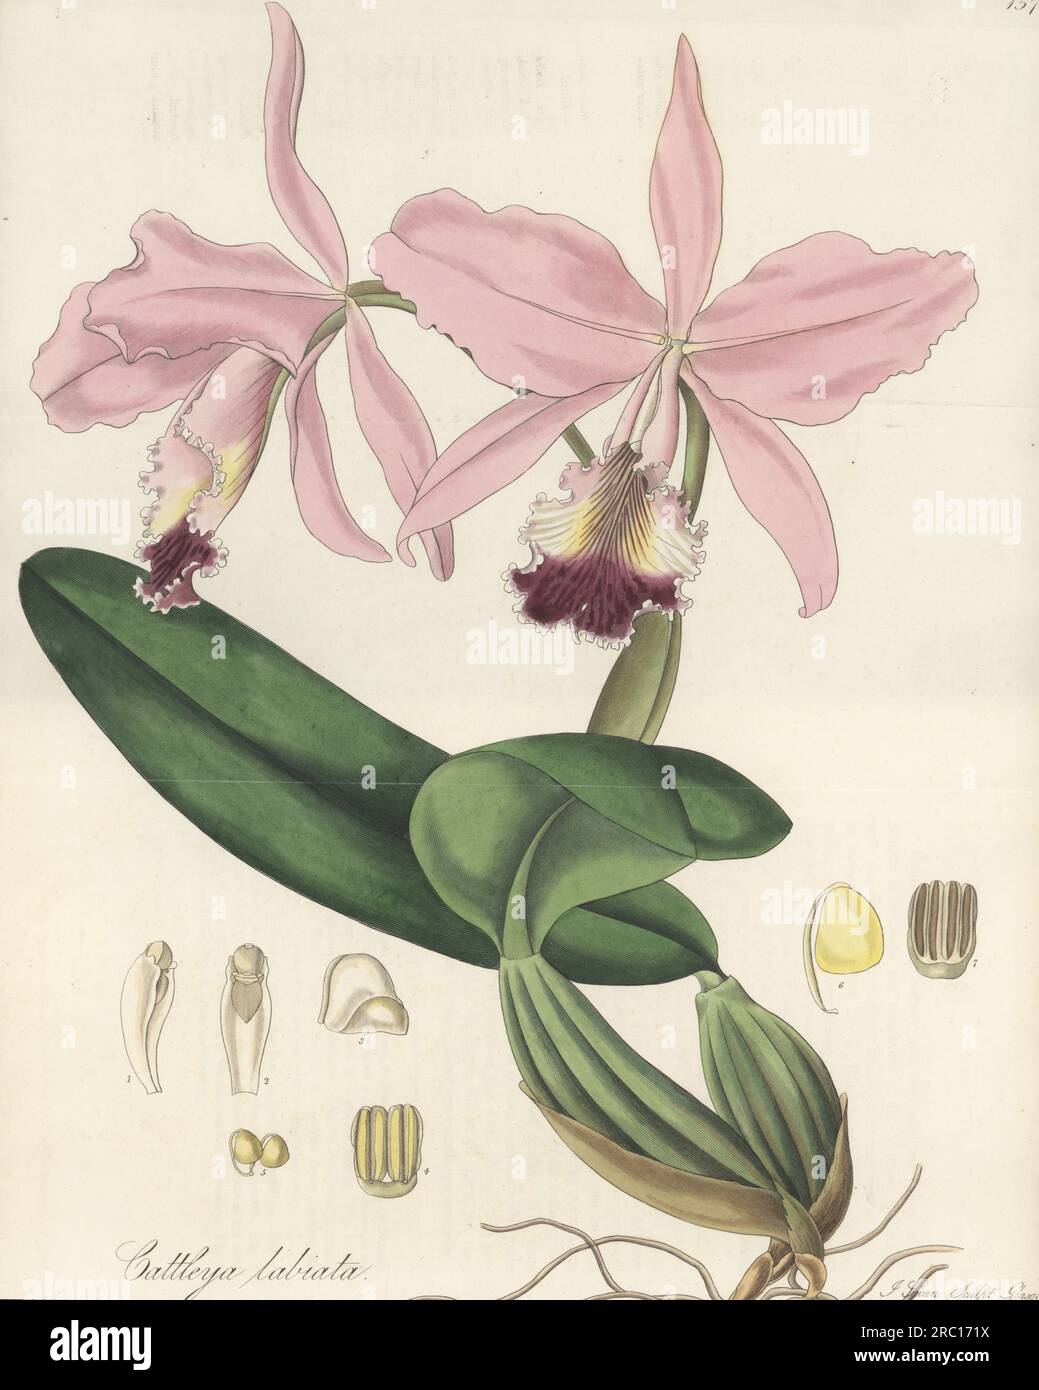 Crimson cattleya or ruby-lipped cattleya orchid, Cattleya labiata. Native to South America, sent from Brazil by English ornithologist William Swainson. Splendid-flowered catleya. Handcoloured copperplate engraving by Joseph Swan after a botanical illustration by William Jackson Hooker from his Exotic Flora, William Blackwood, Edinburgh, 1827. Stock Photo